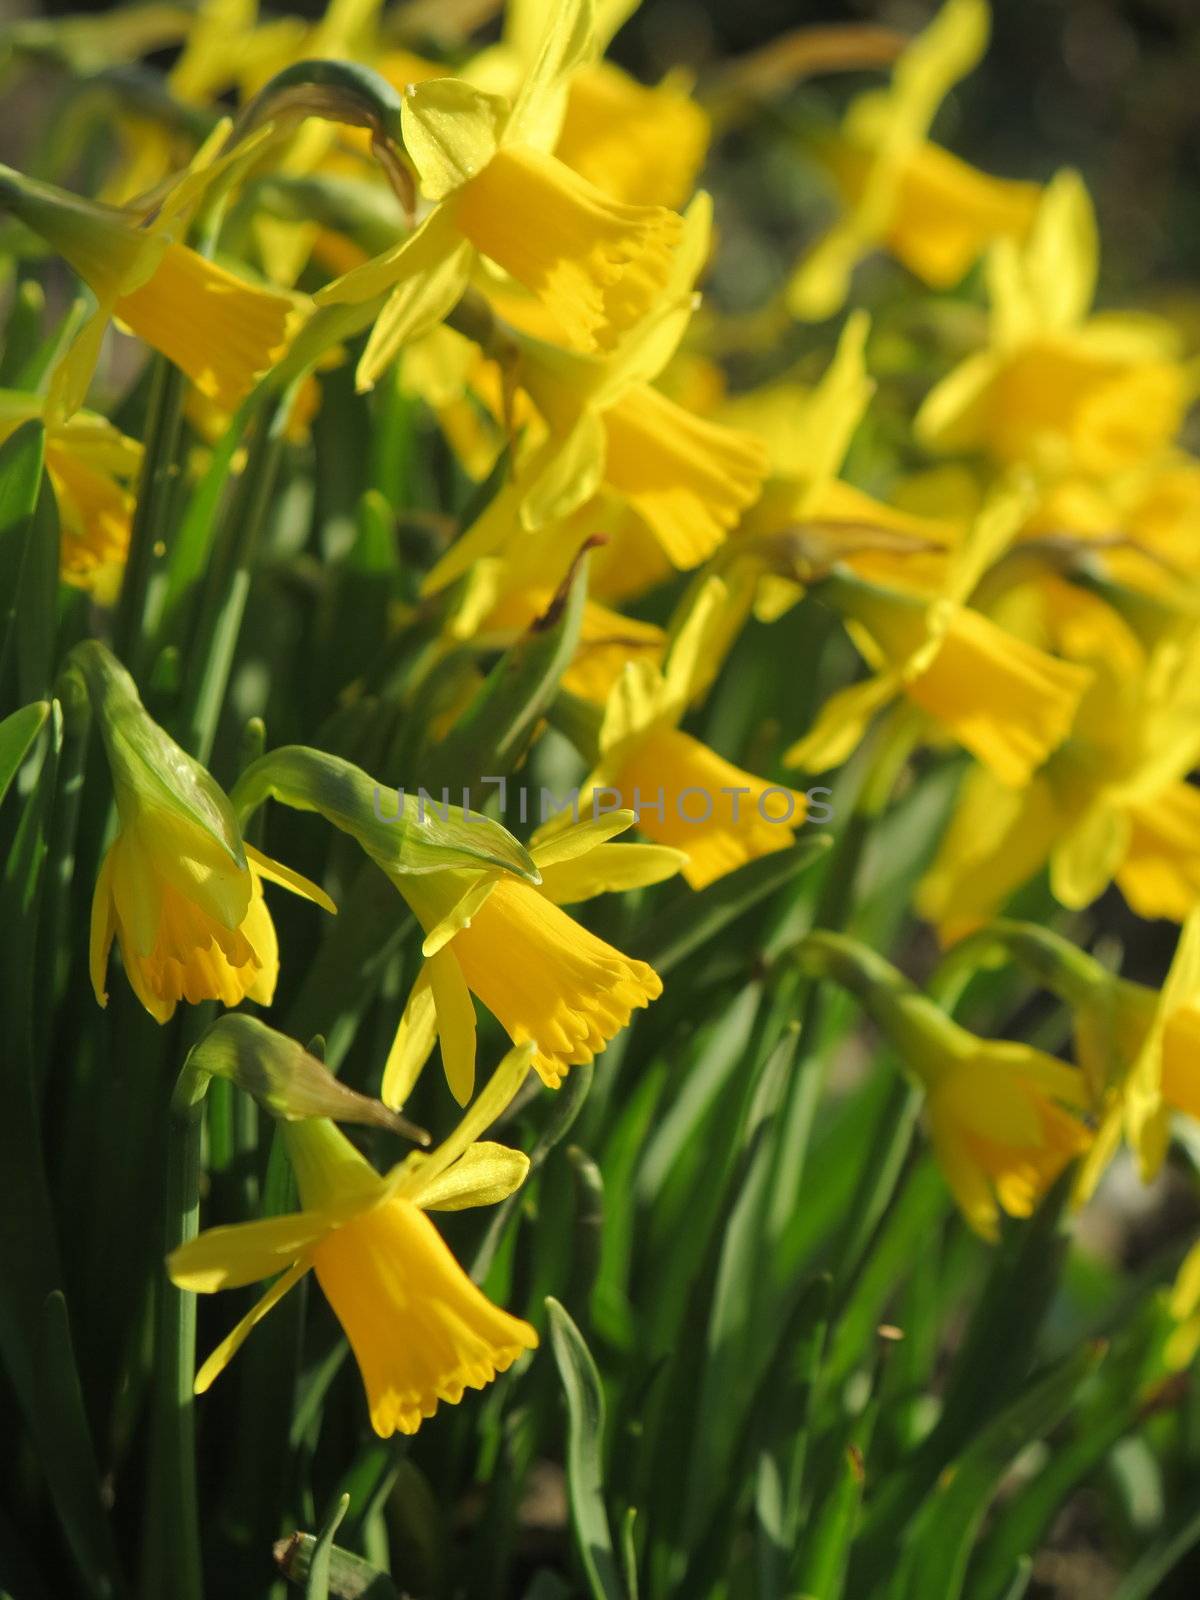 Outdoor shot of yellow daffodils